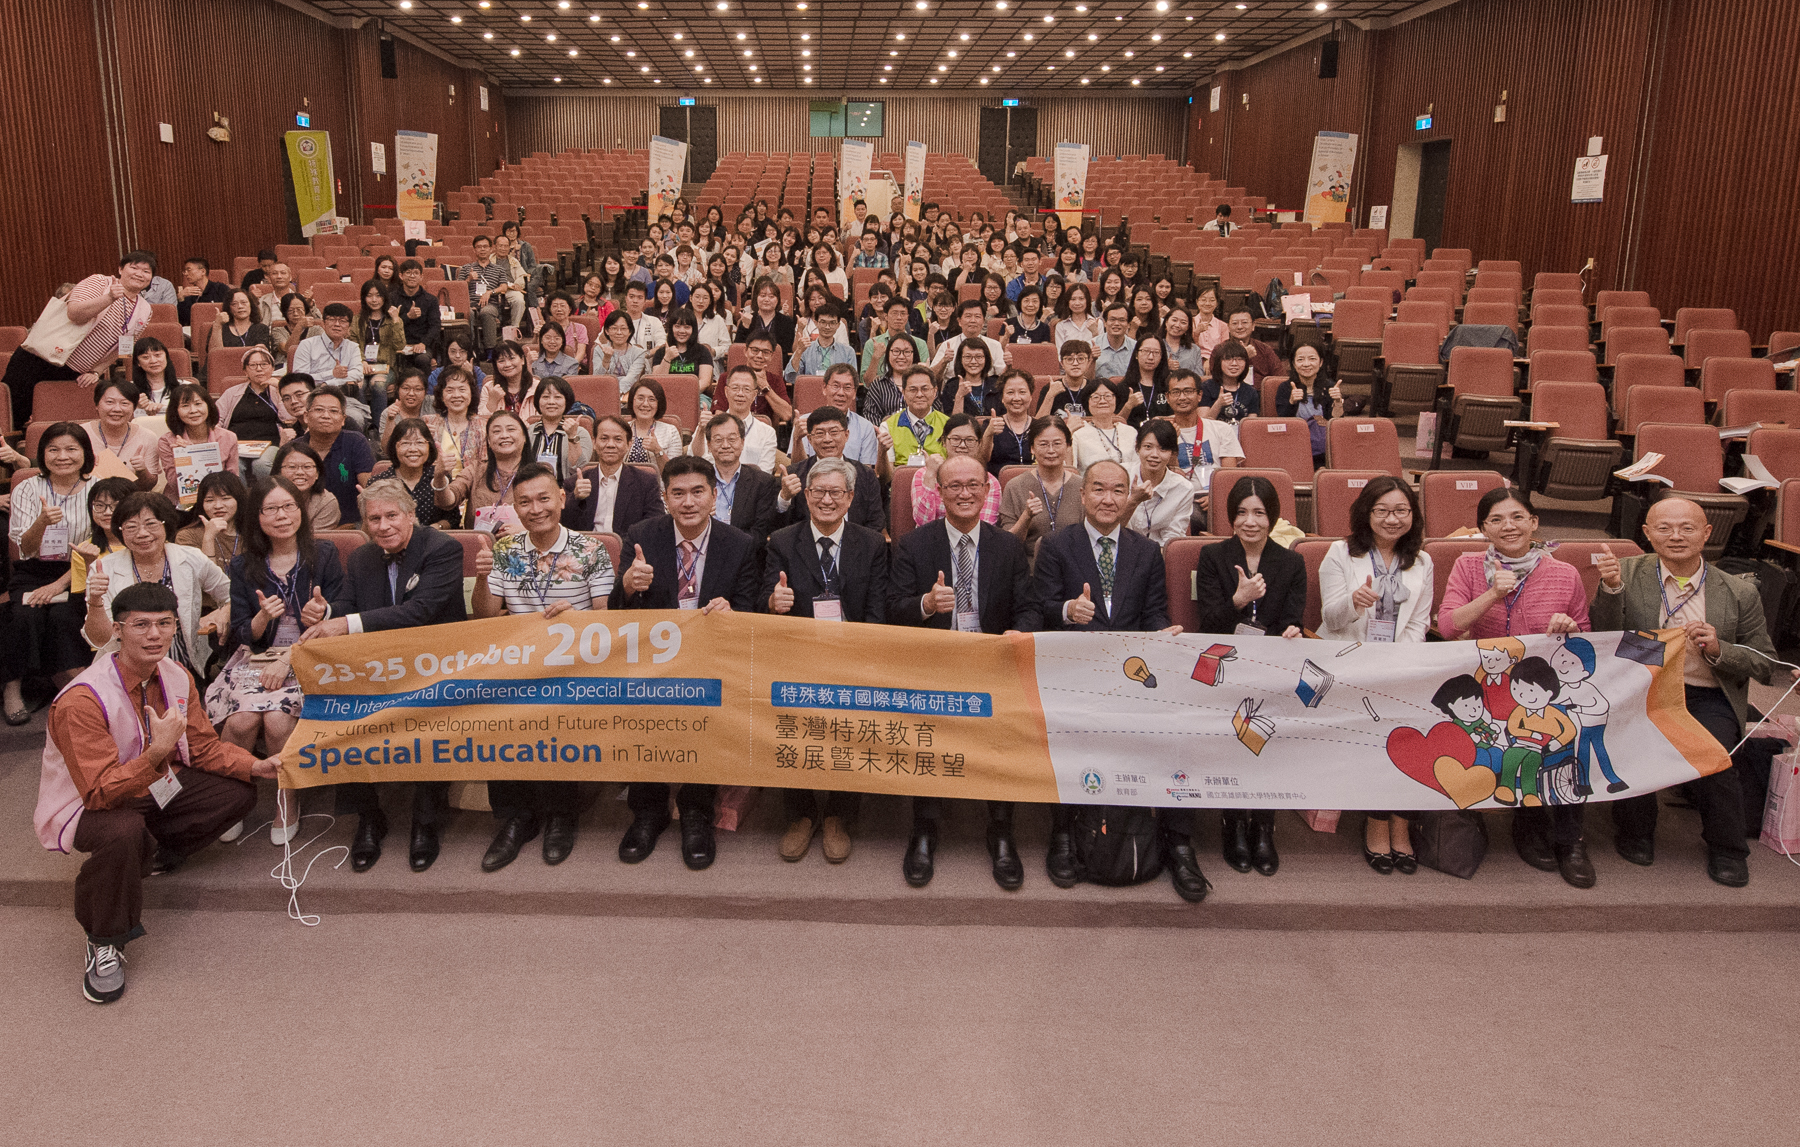 Sharing Different Global Perspectives of Special Education The Ministry of Education holds the 1st International Conference on Special Education